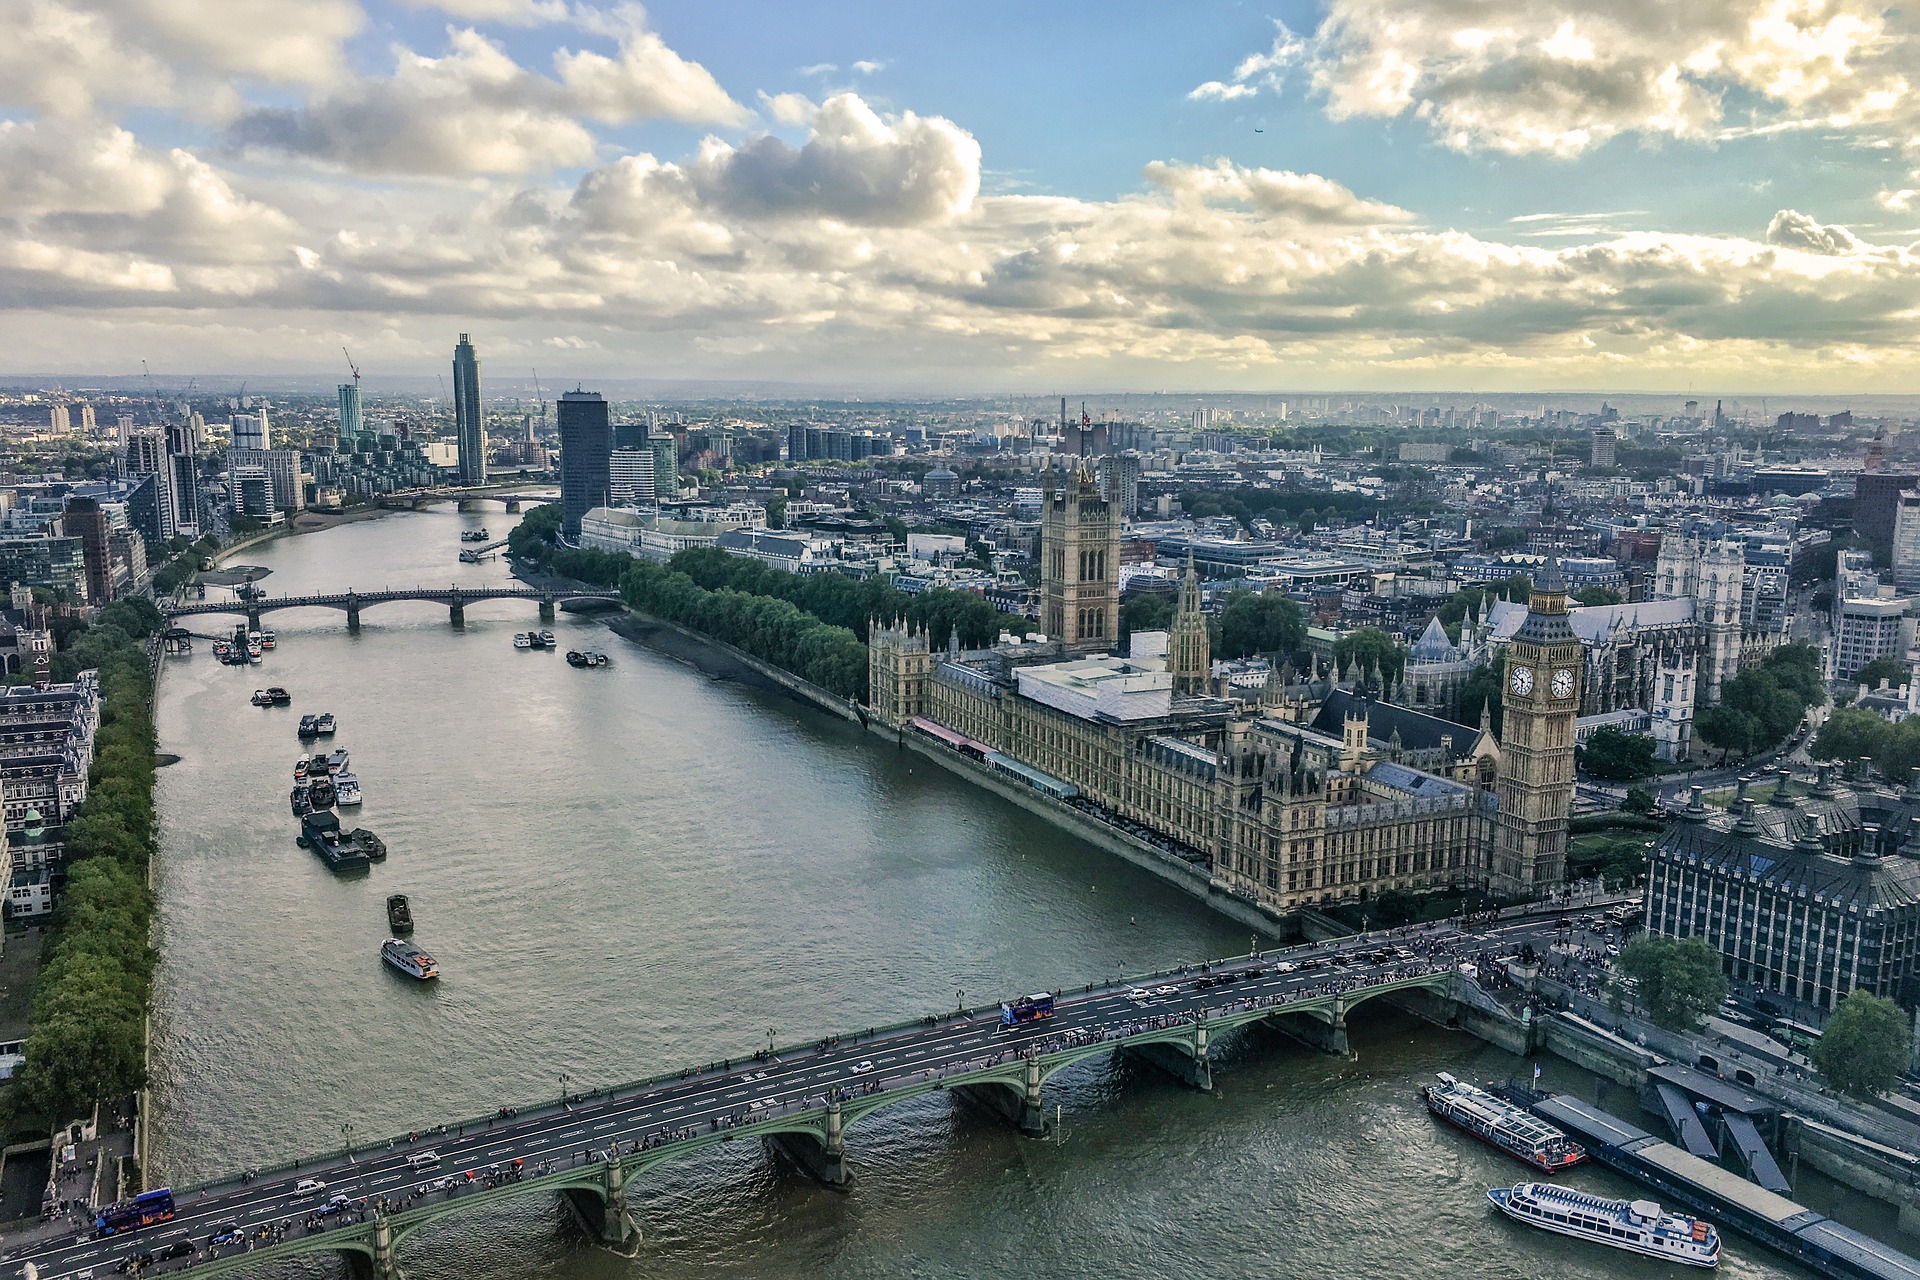 A view of central London with a focus on the River Thames. Harley Street can be found in the borough of the City of Westminster. In the image, the Palace of Westminster is to the right side of the river, and buildings span until the horizon line.